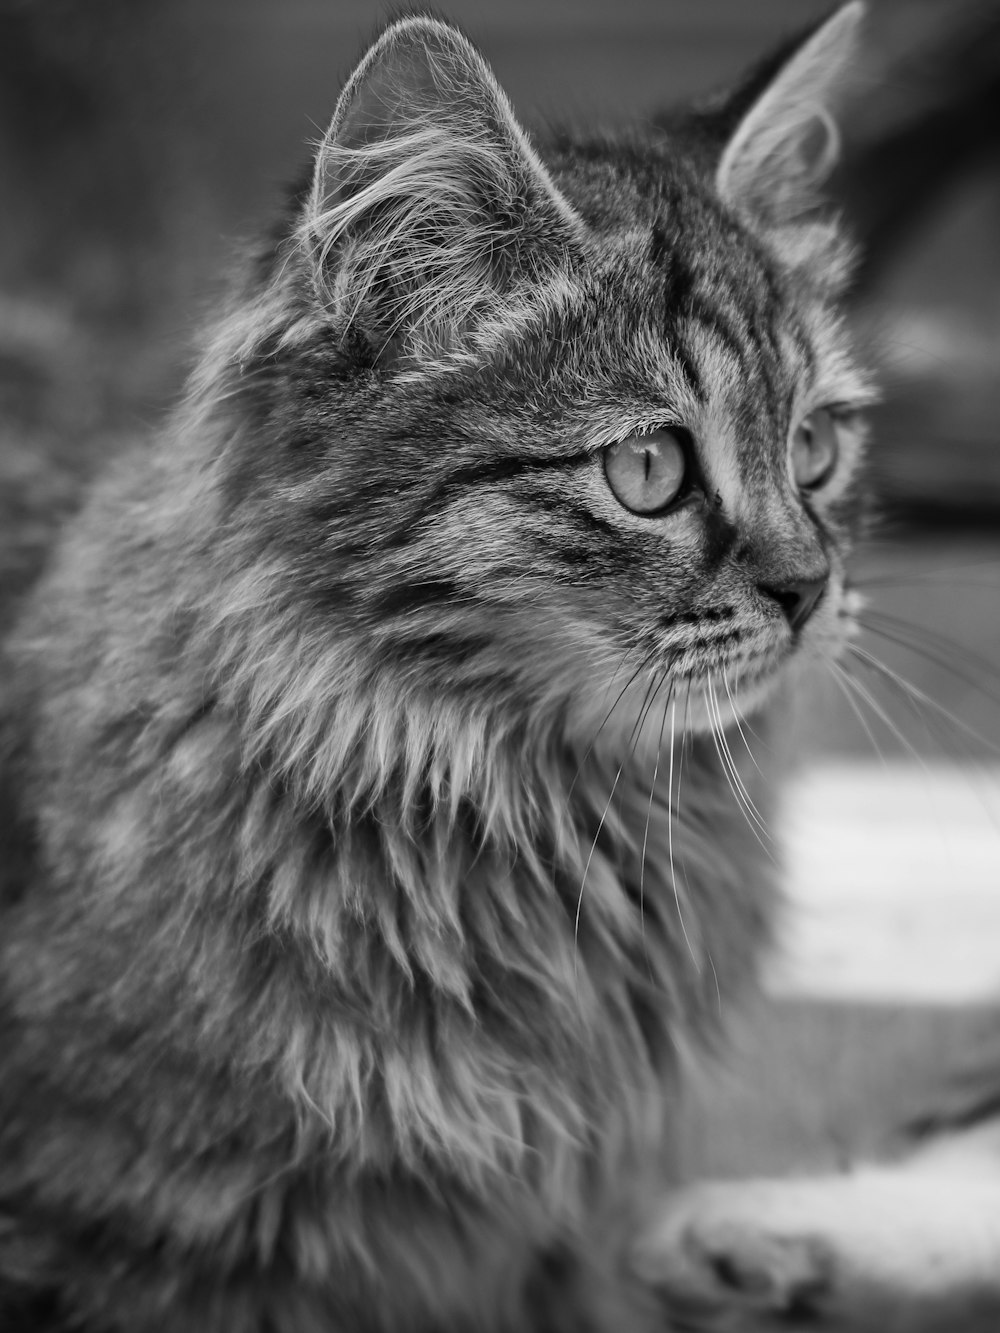 grayscale photo of long fur cat